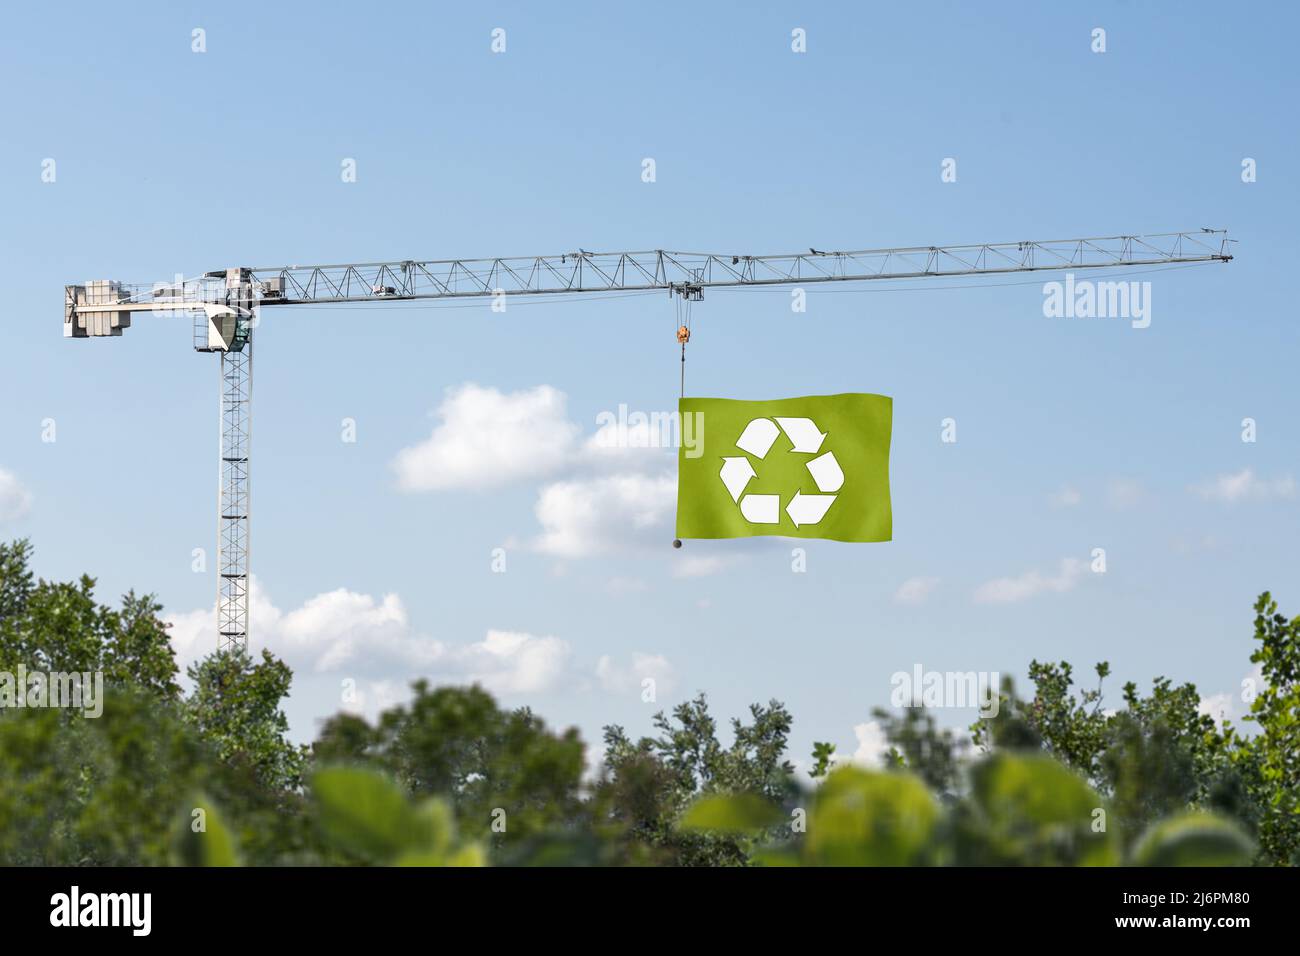 Building crane hoisting a green flag for sustainability Stock Photo